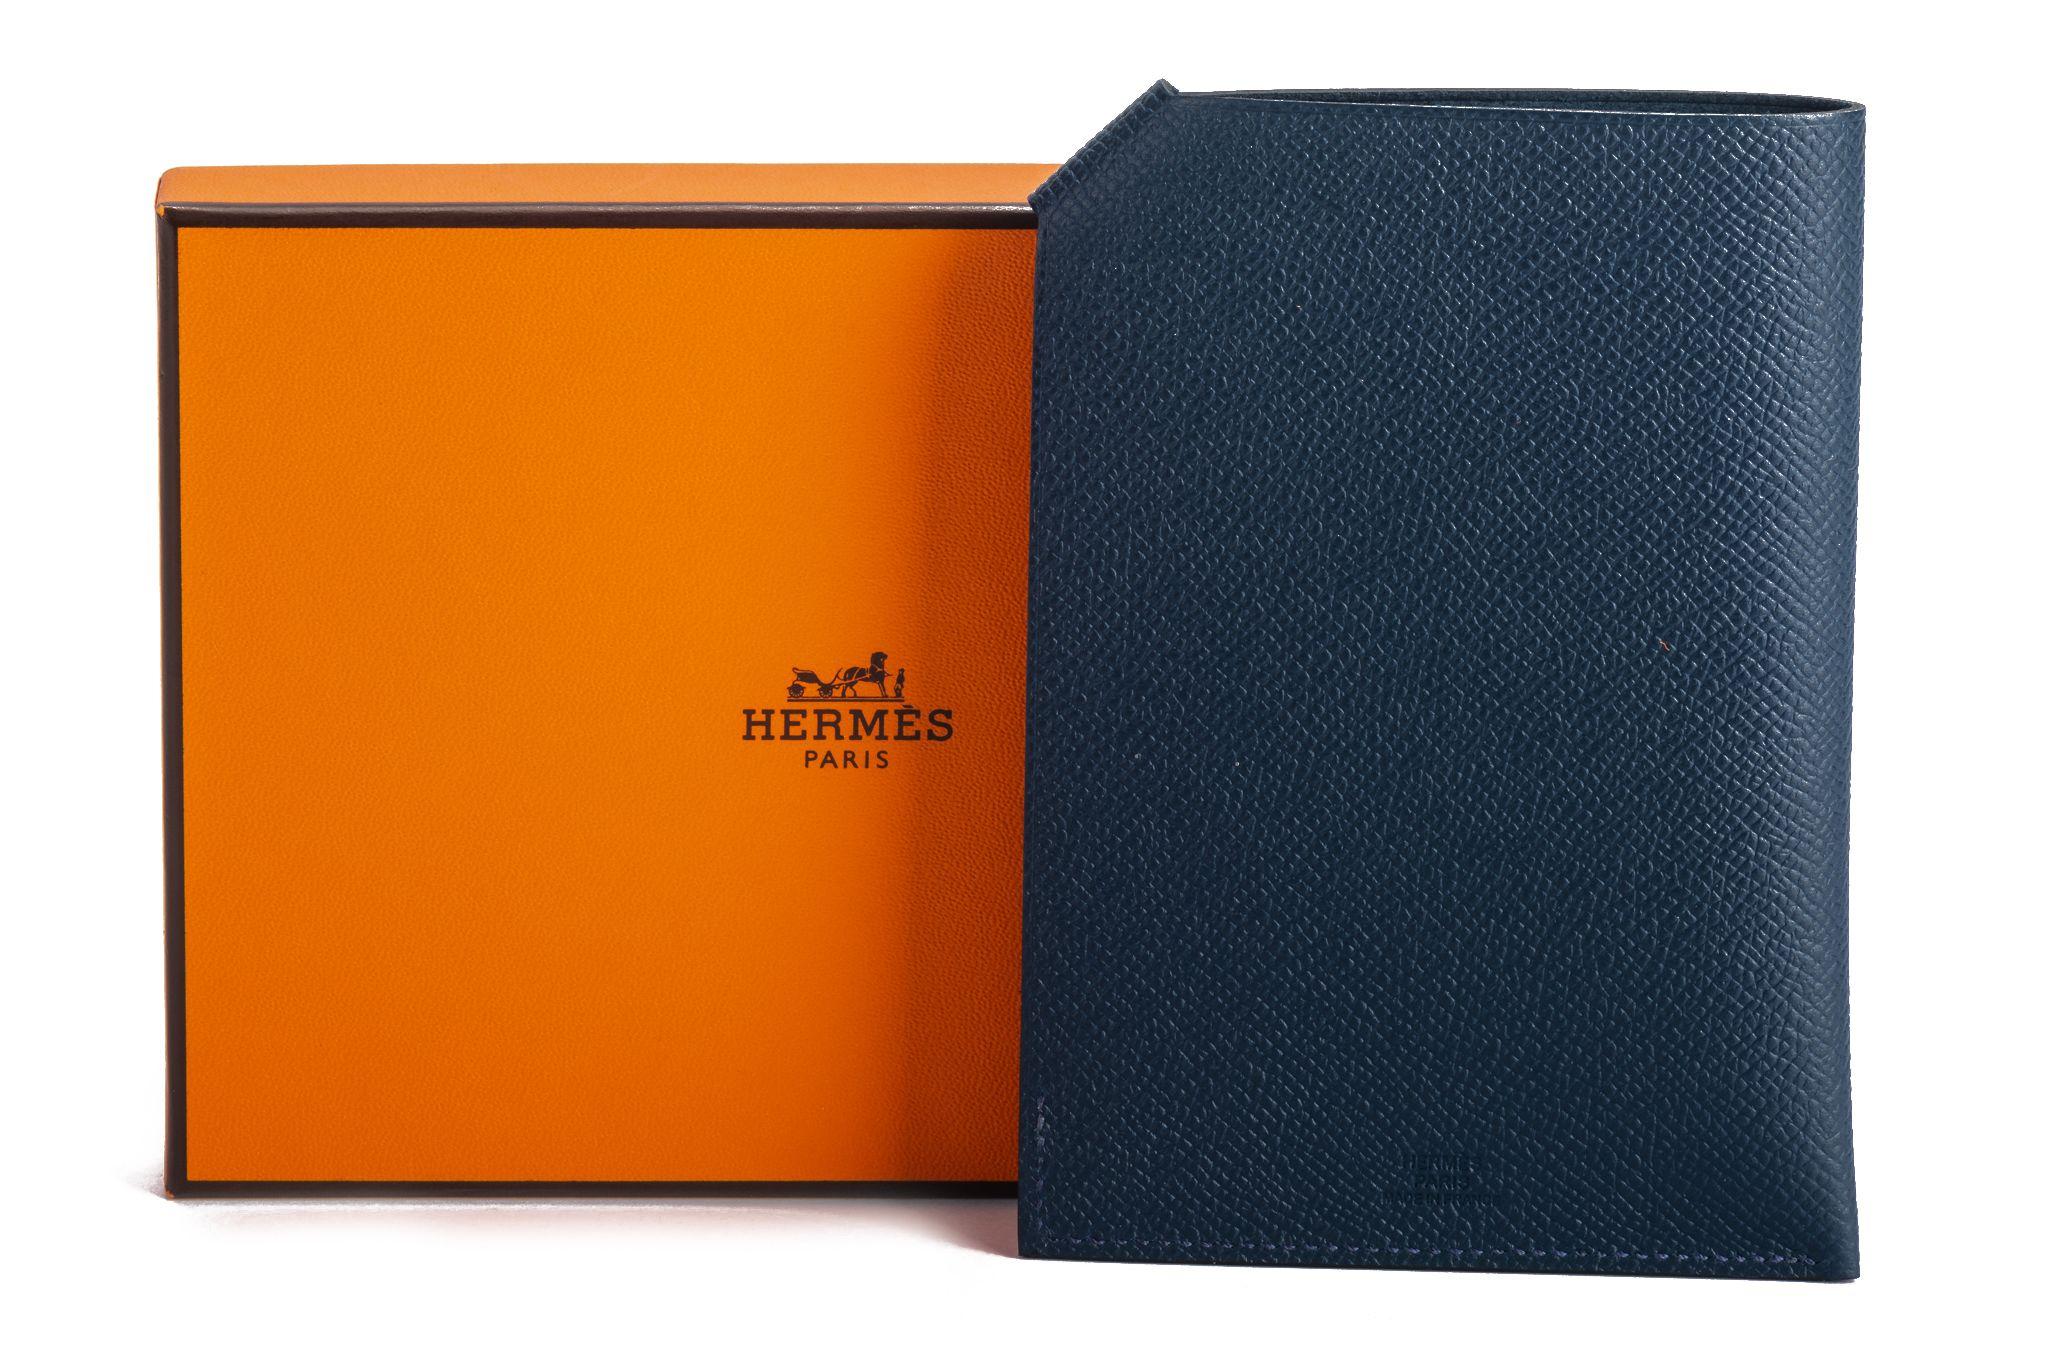 Hermès blue nuit Epsom leather passport holder. Date stamp Y. Brand new with box and ribbon.